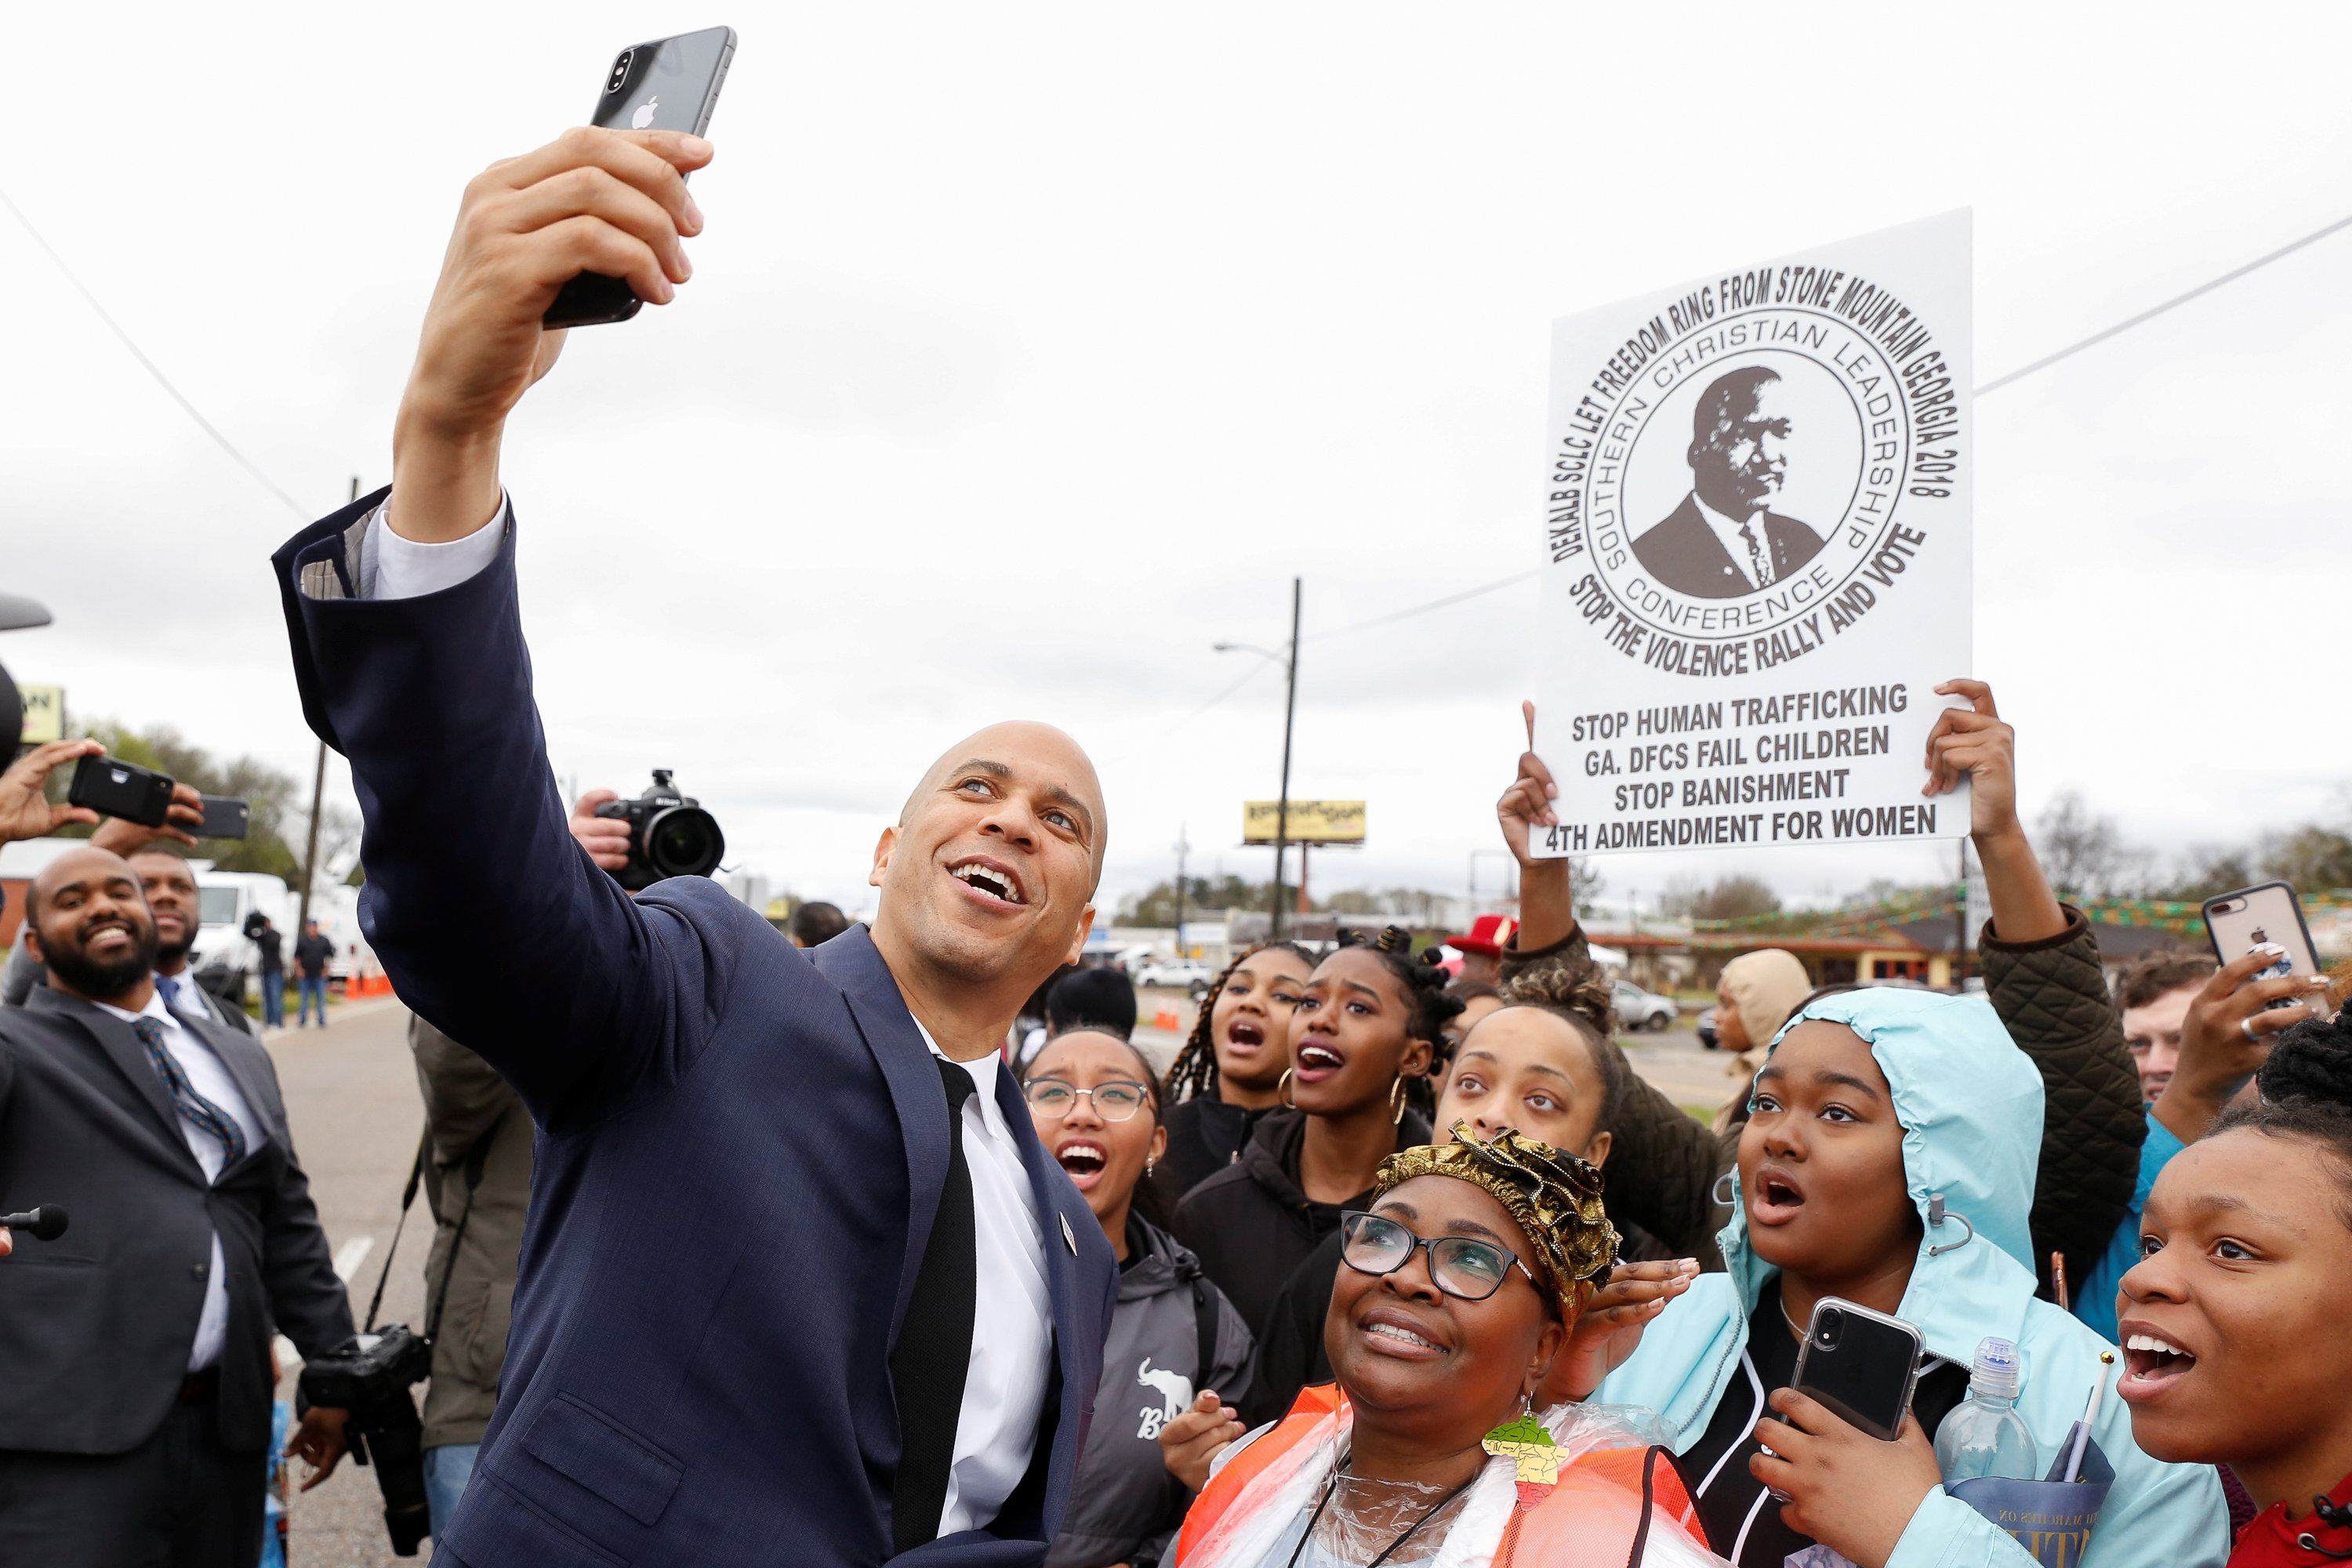 2019-03-03T221005Z_1232155104_RC1A8C9046D0_RTRMADP_3_USA-ELECTION-BOOKER